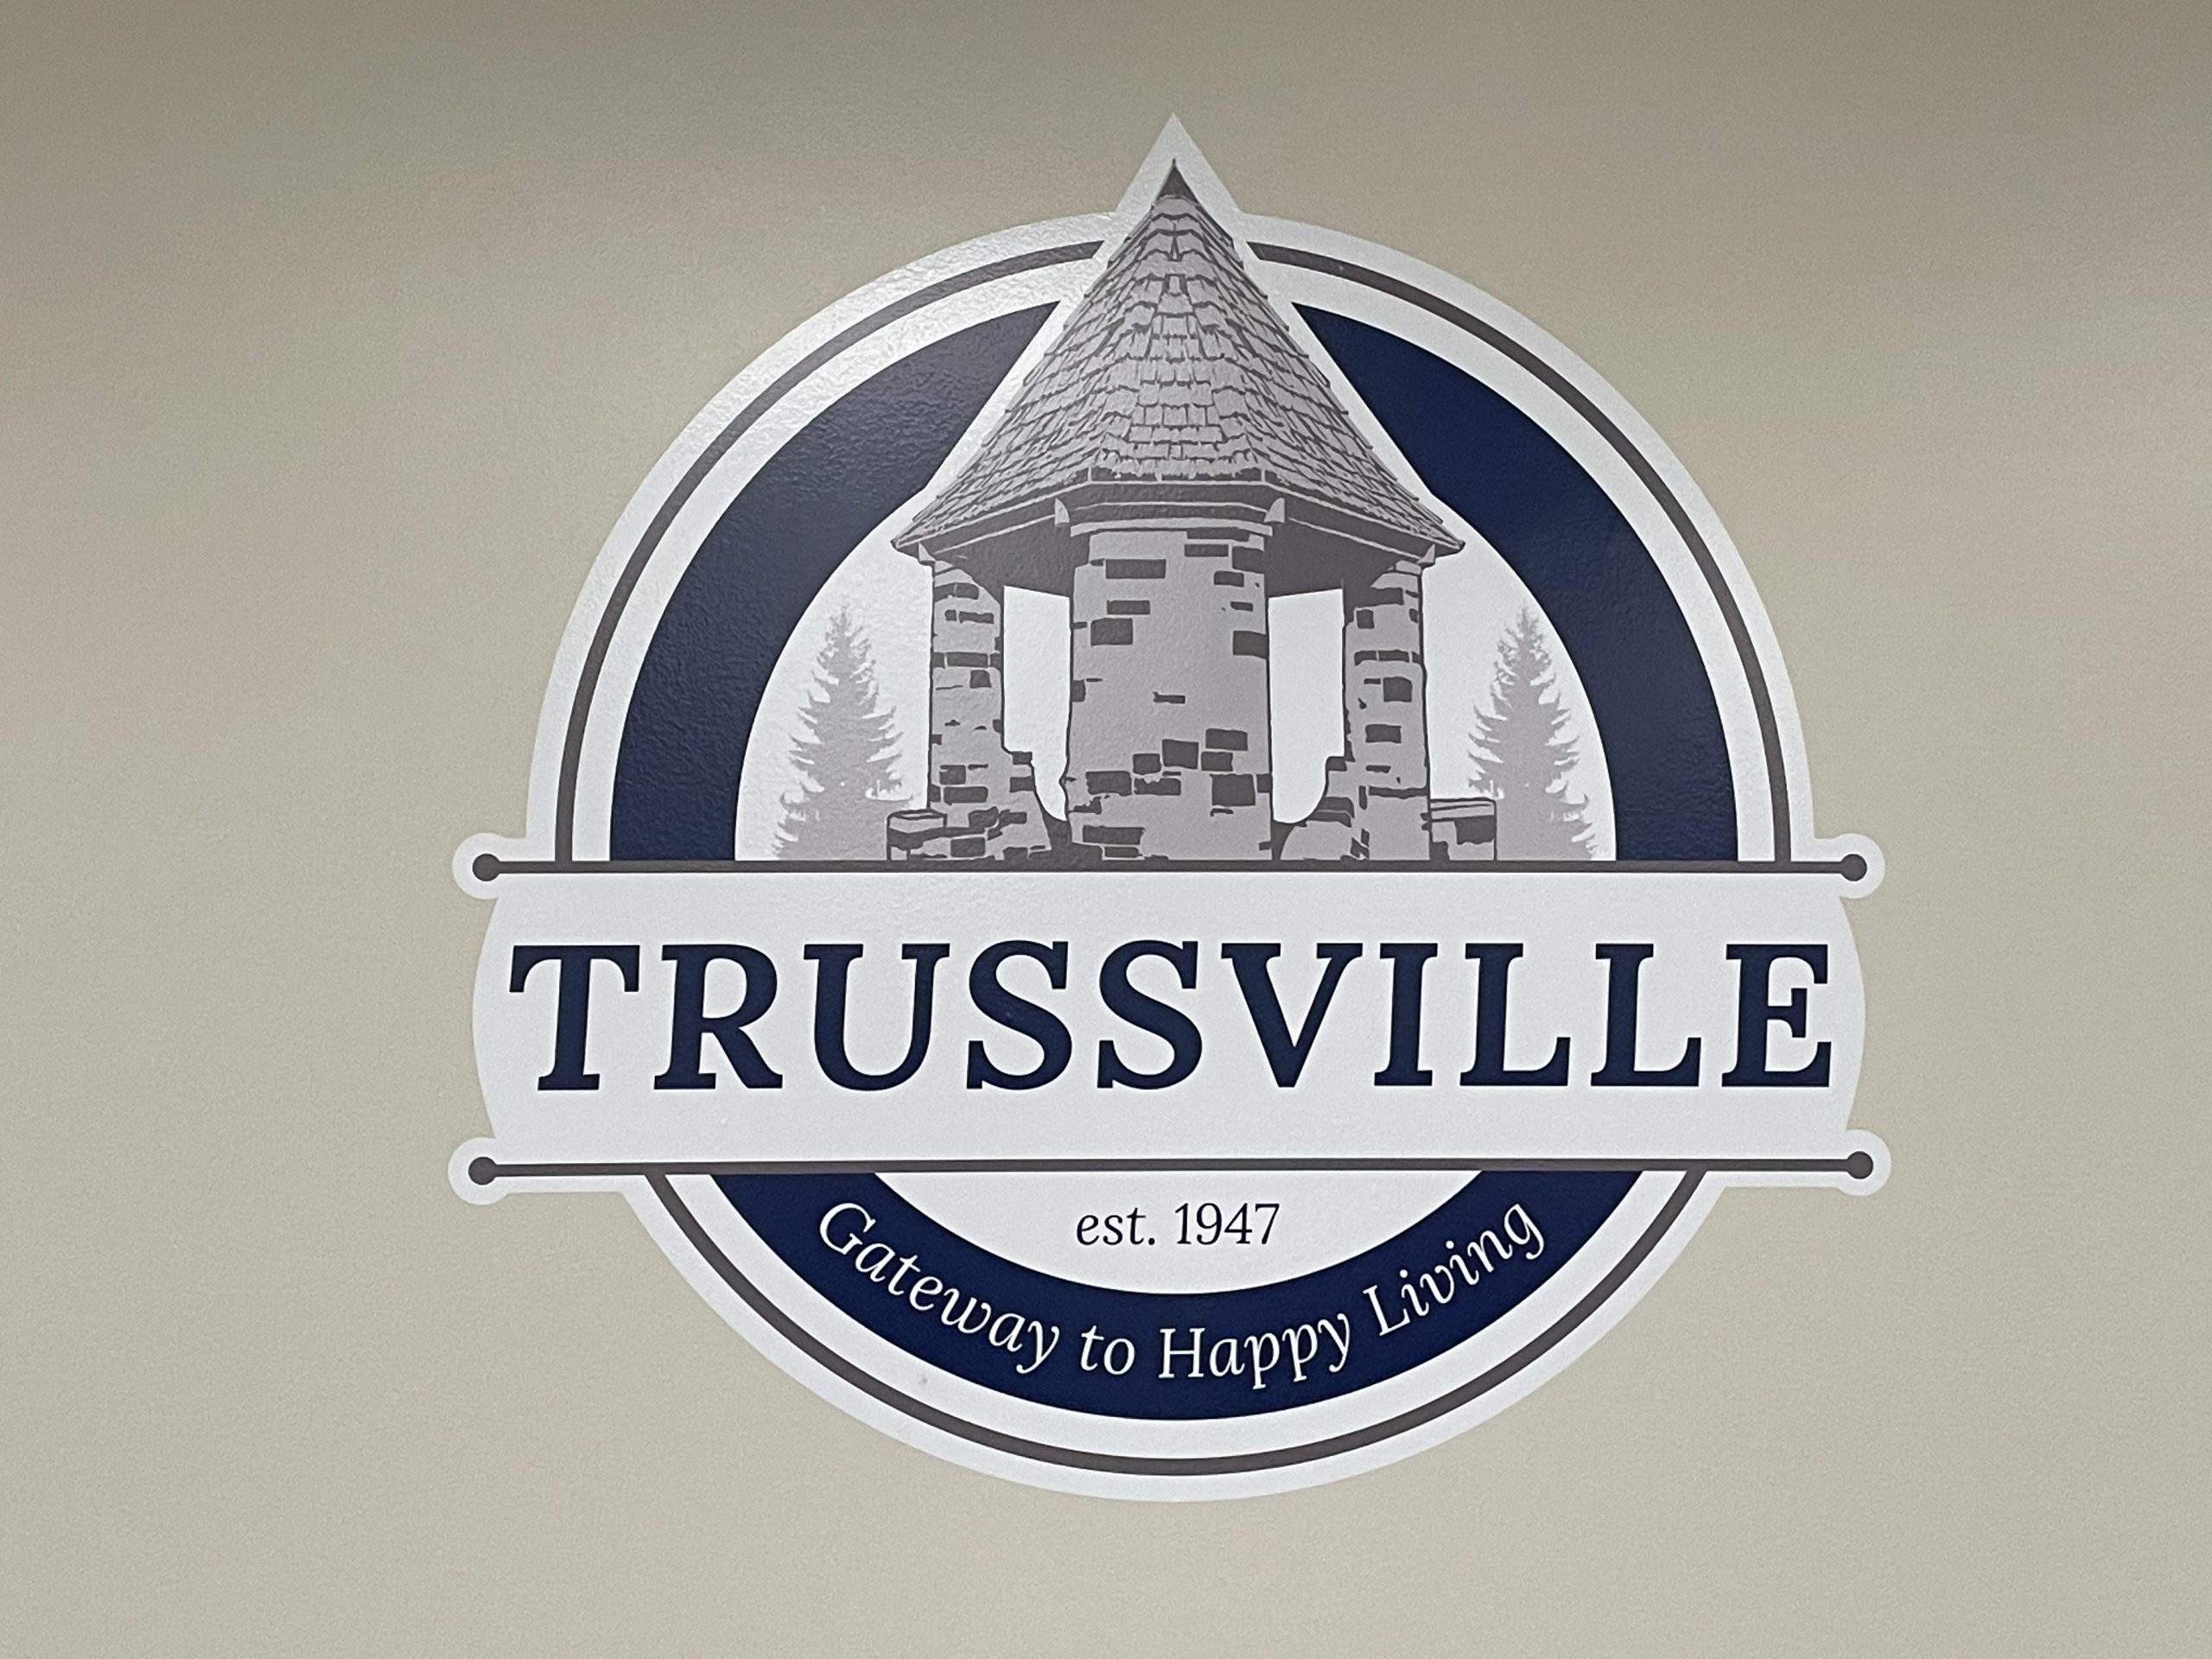 Trussville PD to get new video platform, upcoming events in Trussville